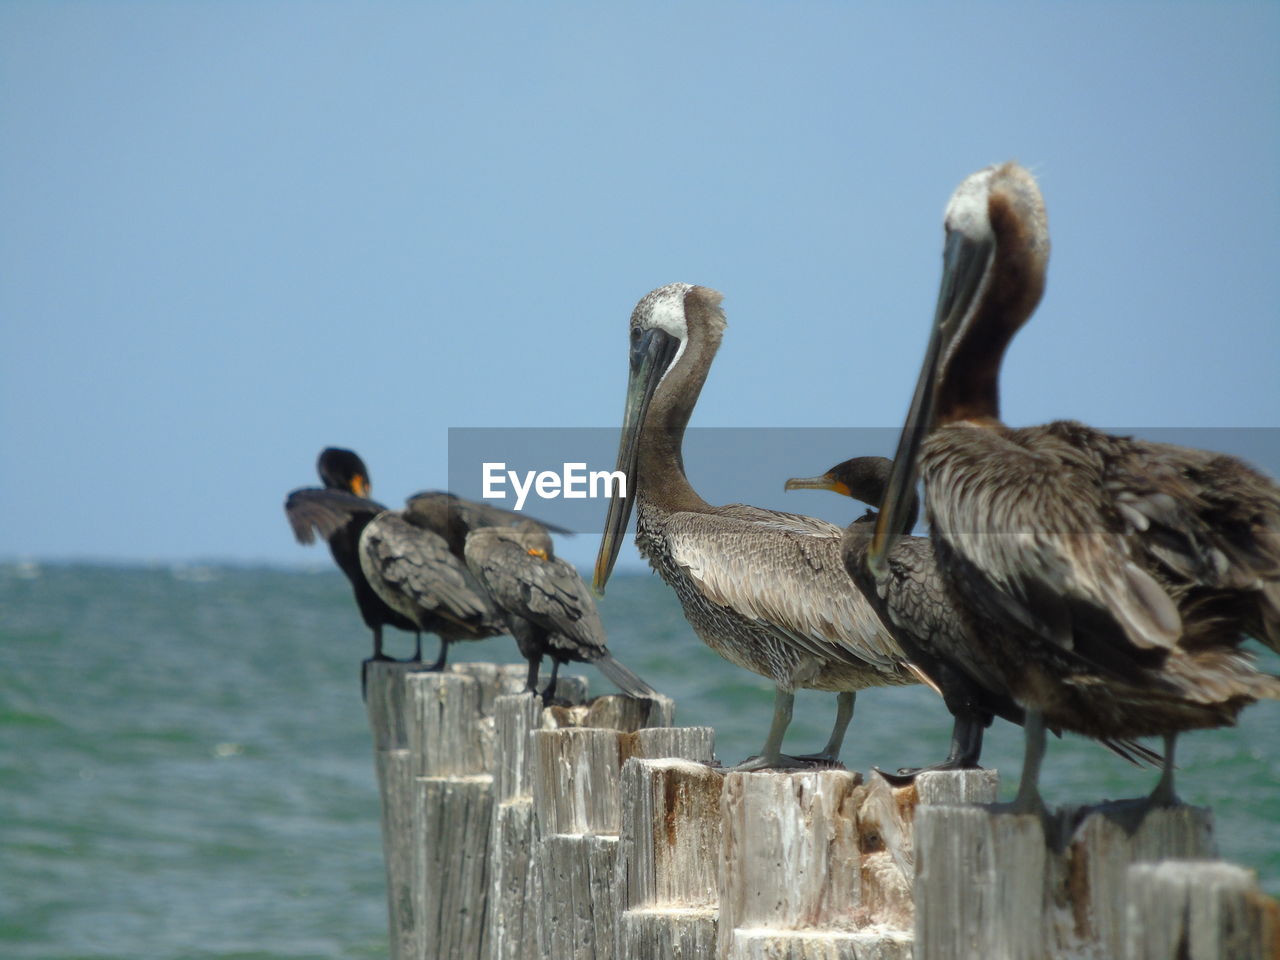 Birds perching on wooden post against clear sky on the ocean